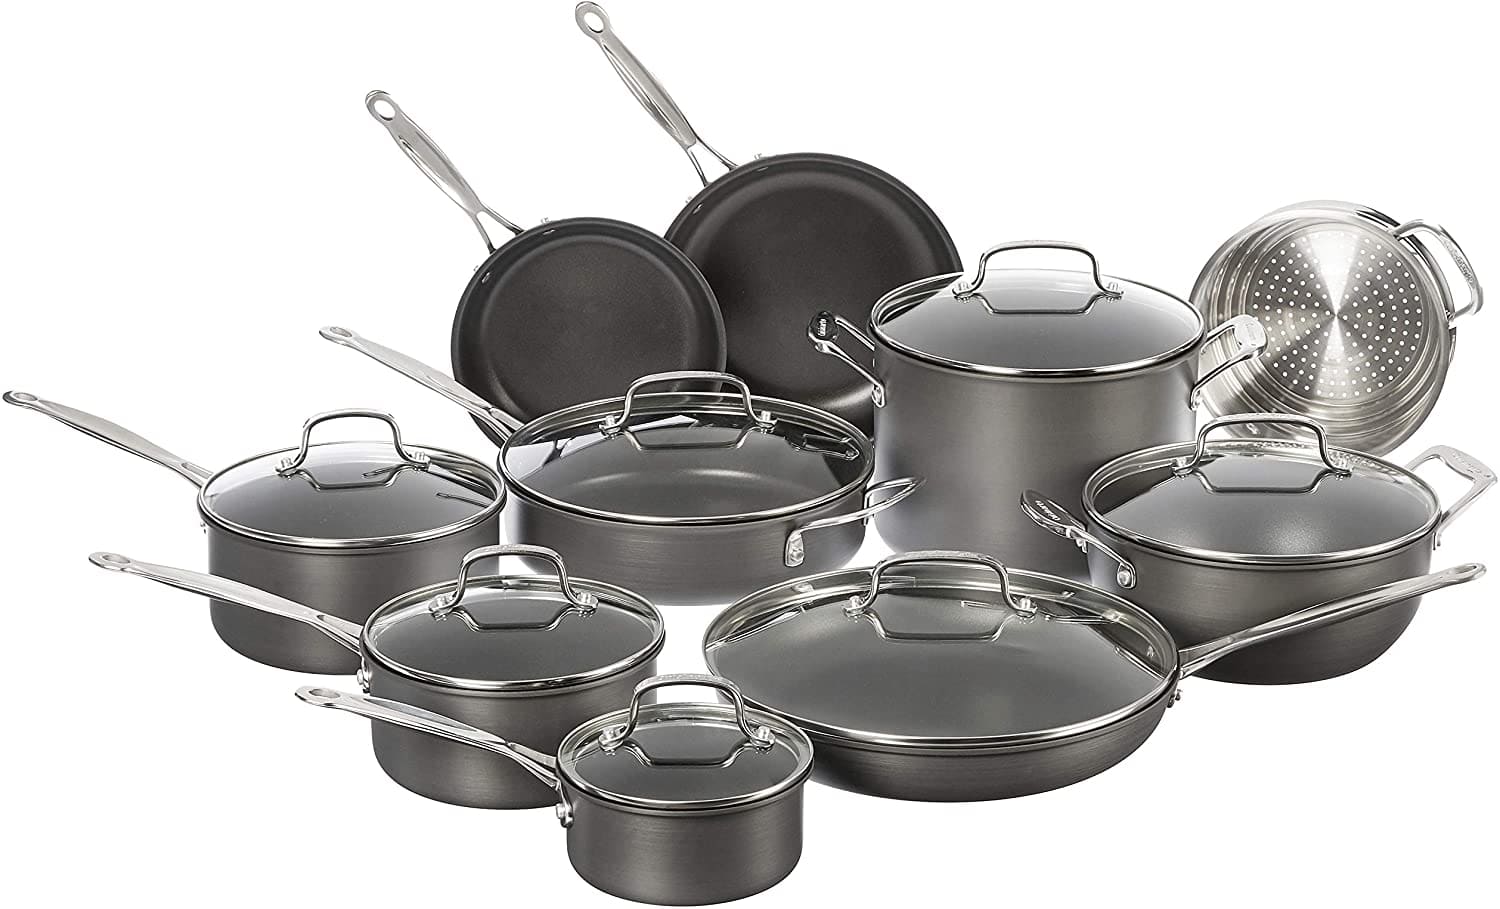 cuisinart chef's classic hard anodized